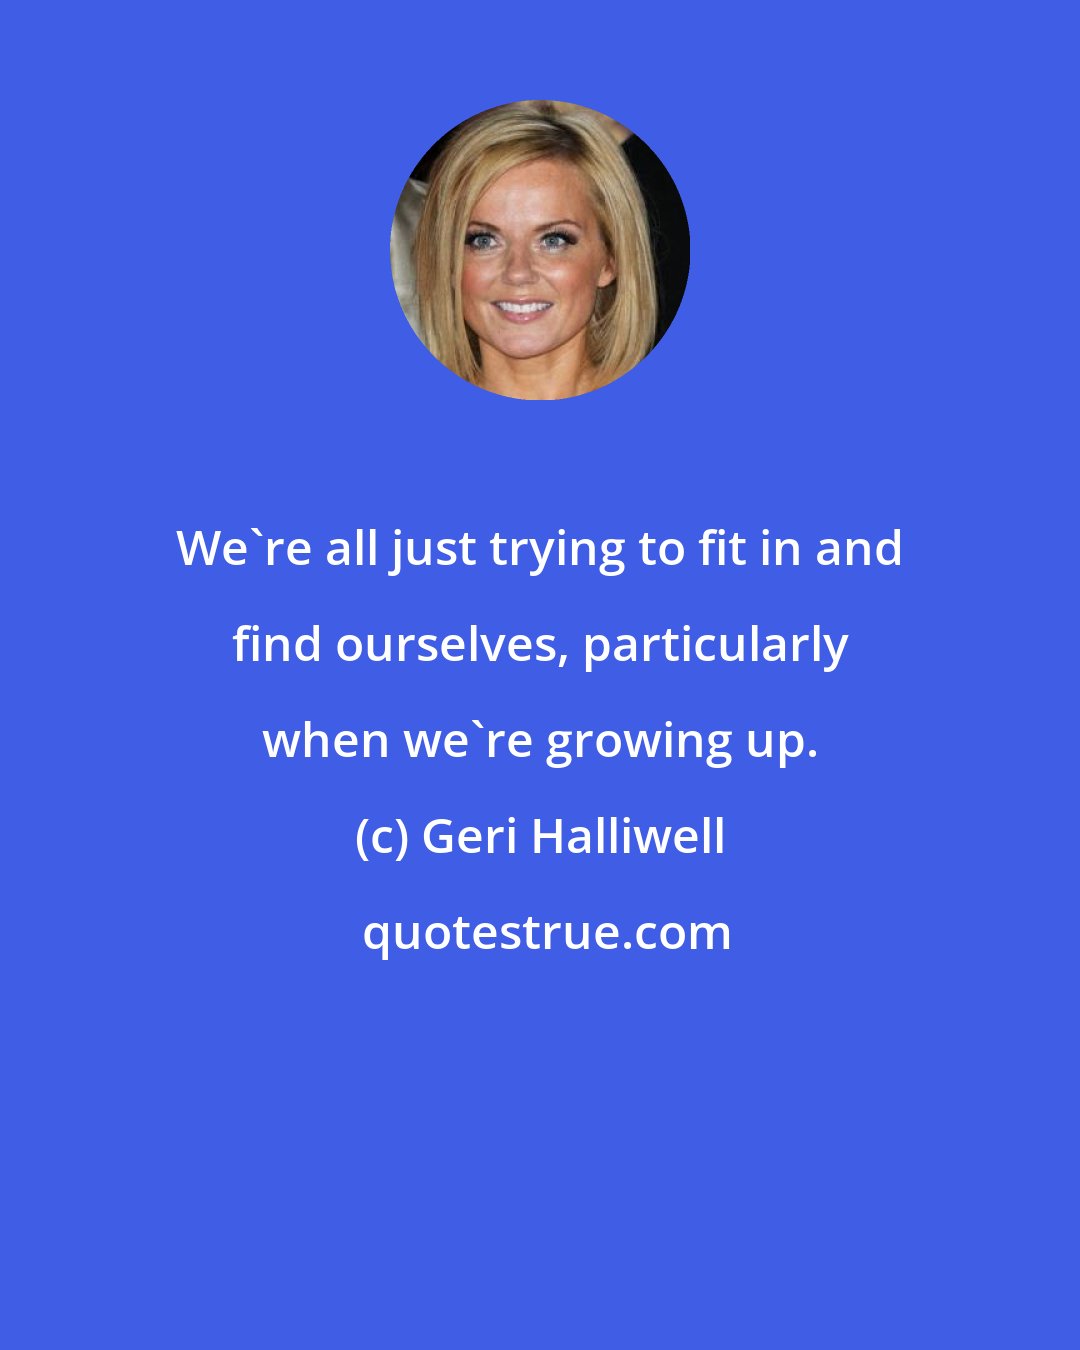 Geri Halliwell: We're all just trying to fit in and find ourselves, particularly when we're growing up.